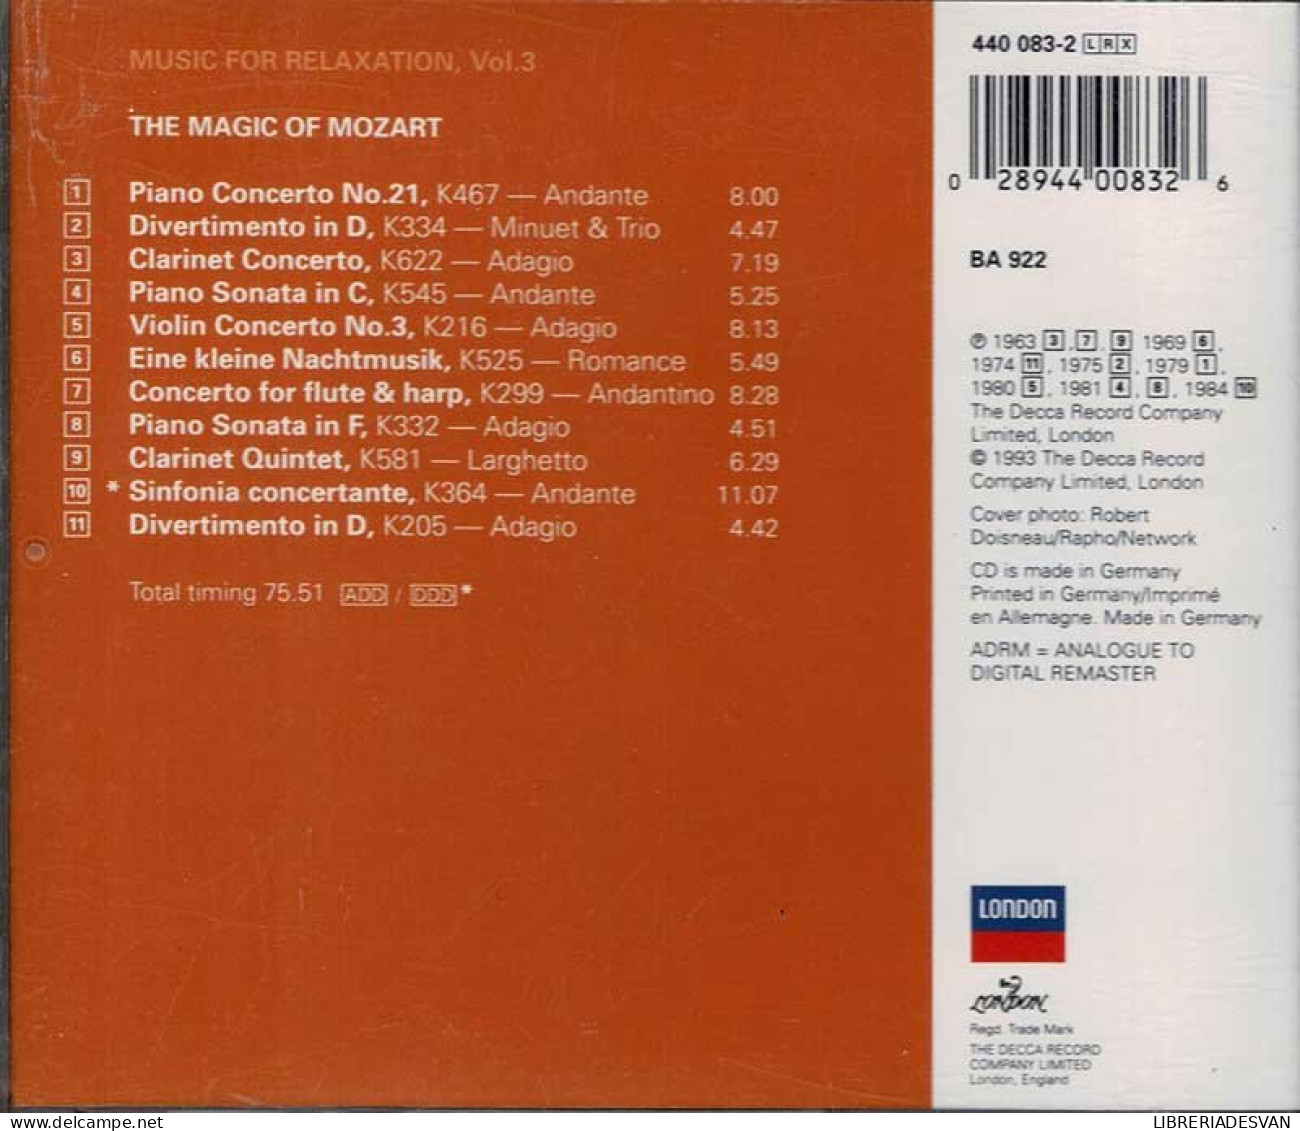 Music For Relaxation, Vol. 3: The Magic Of Mozart. CD - Classical